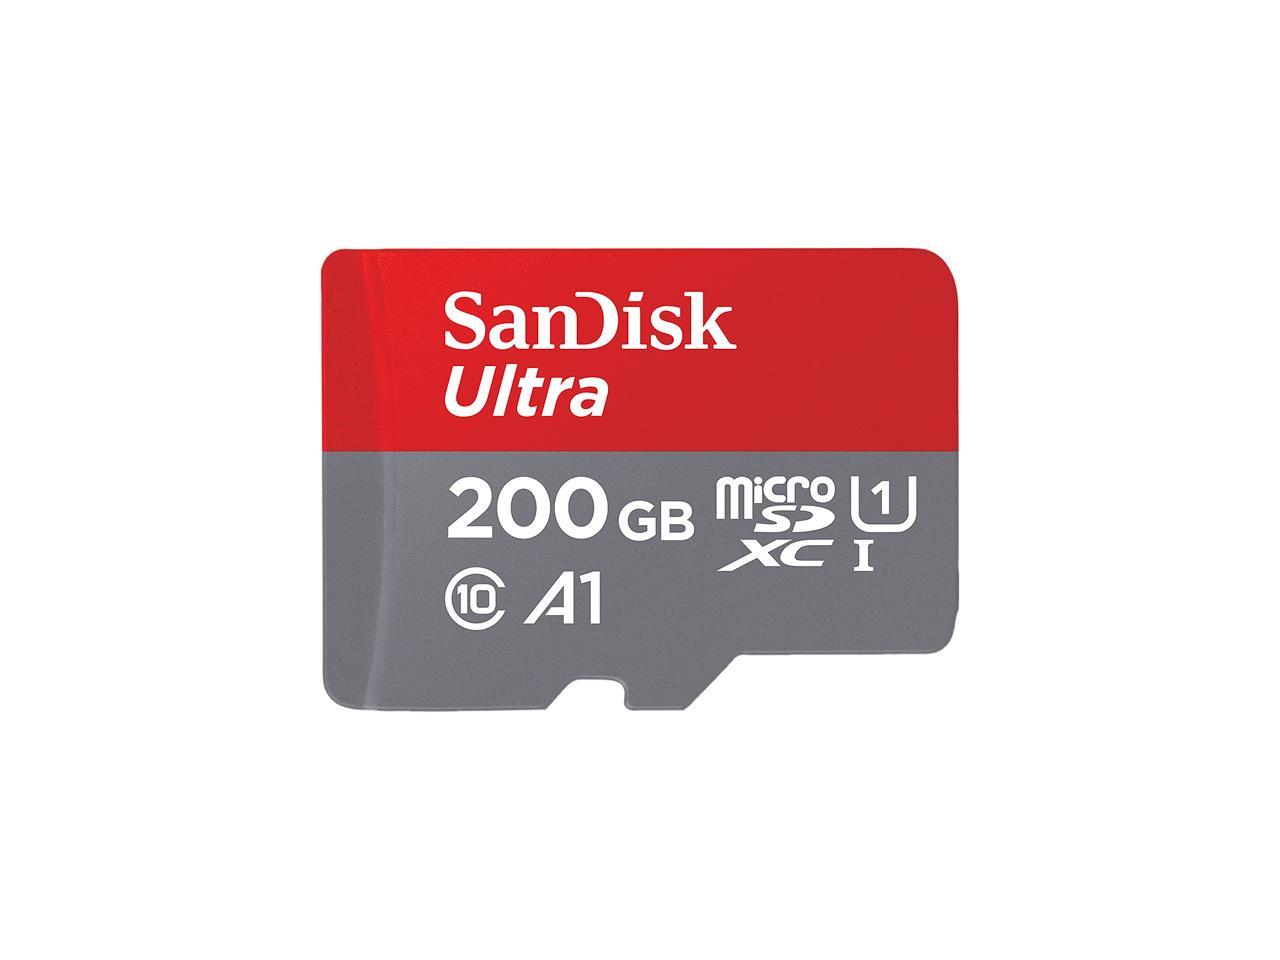 100MBs A1 U1 C10 Works with SanDisk SanDisk Ultra 200GB MicroSDXC Verified for Nokia 8 Sirocco by SanFlash 